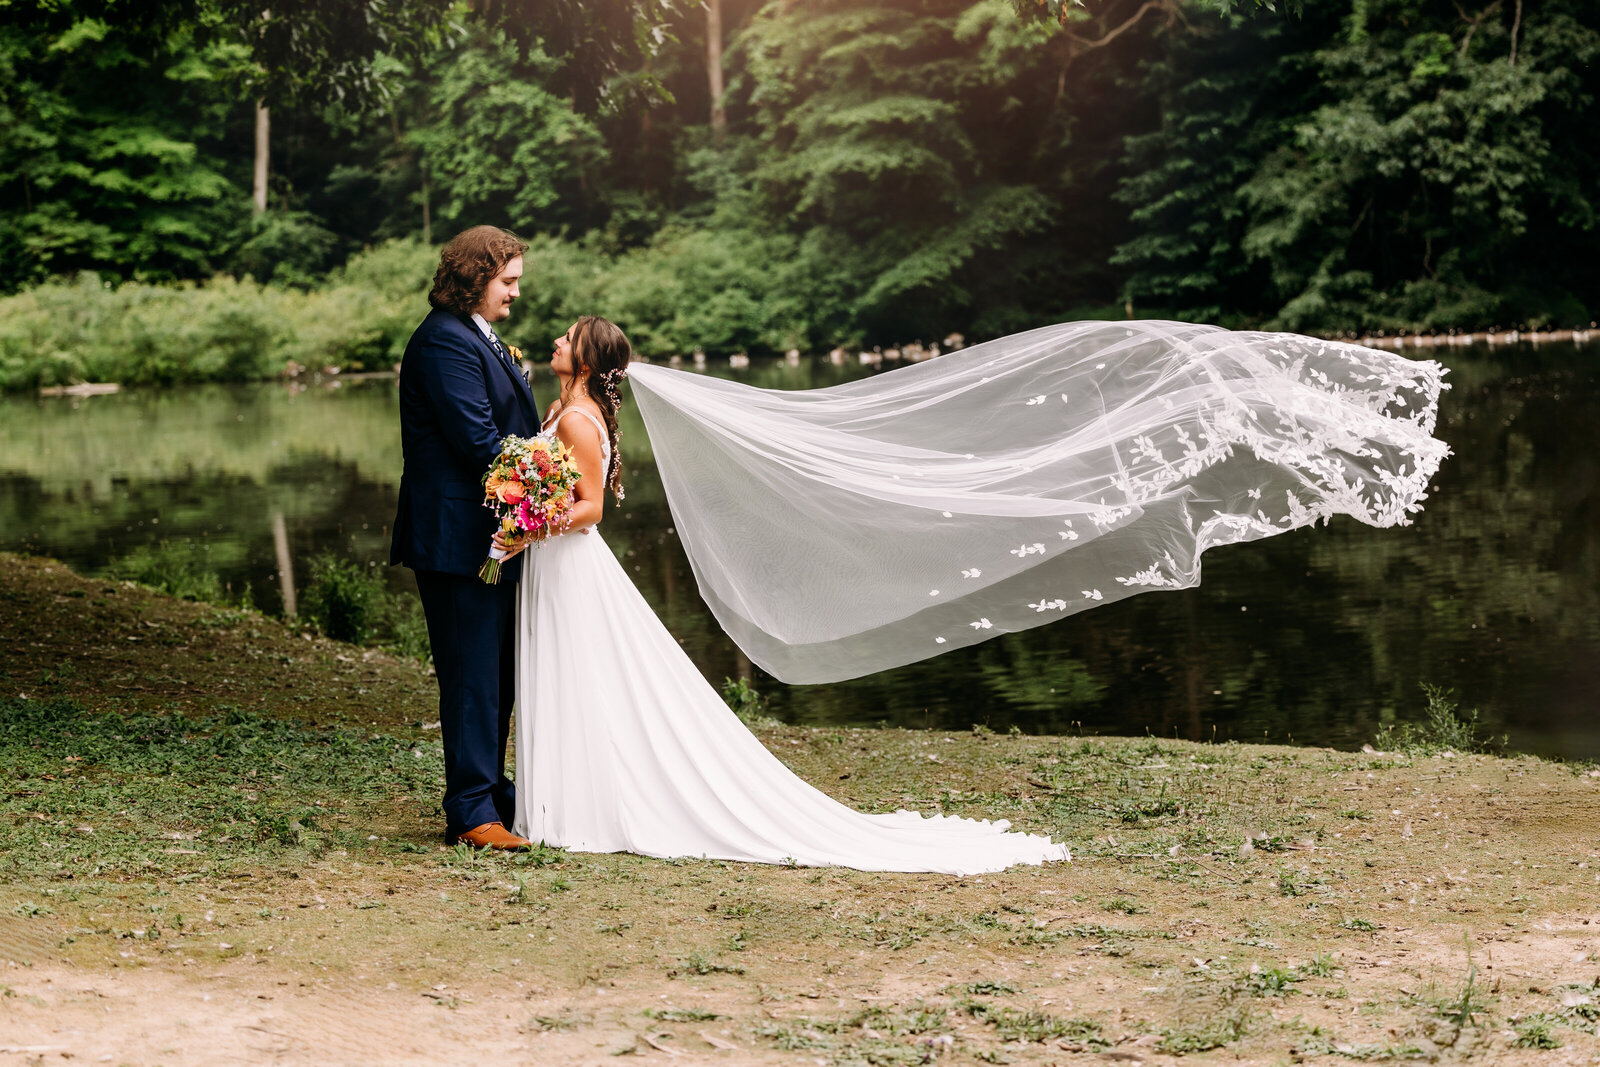 Dynamic shot of the bride's flowing veil  in front of beautiful pond